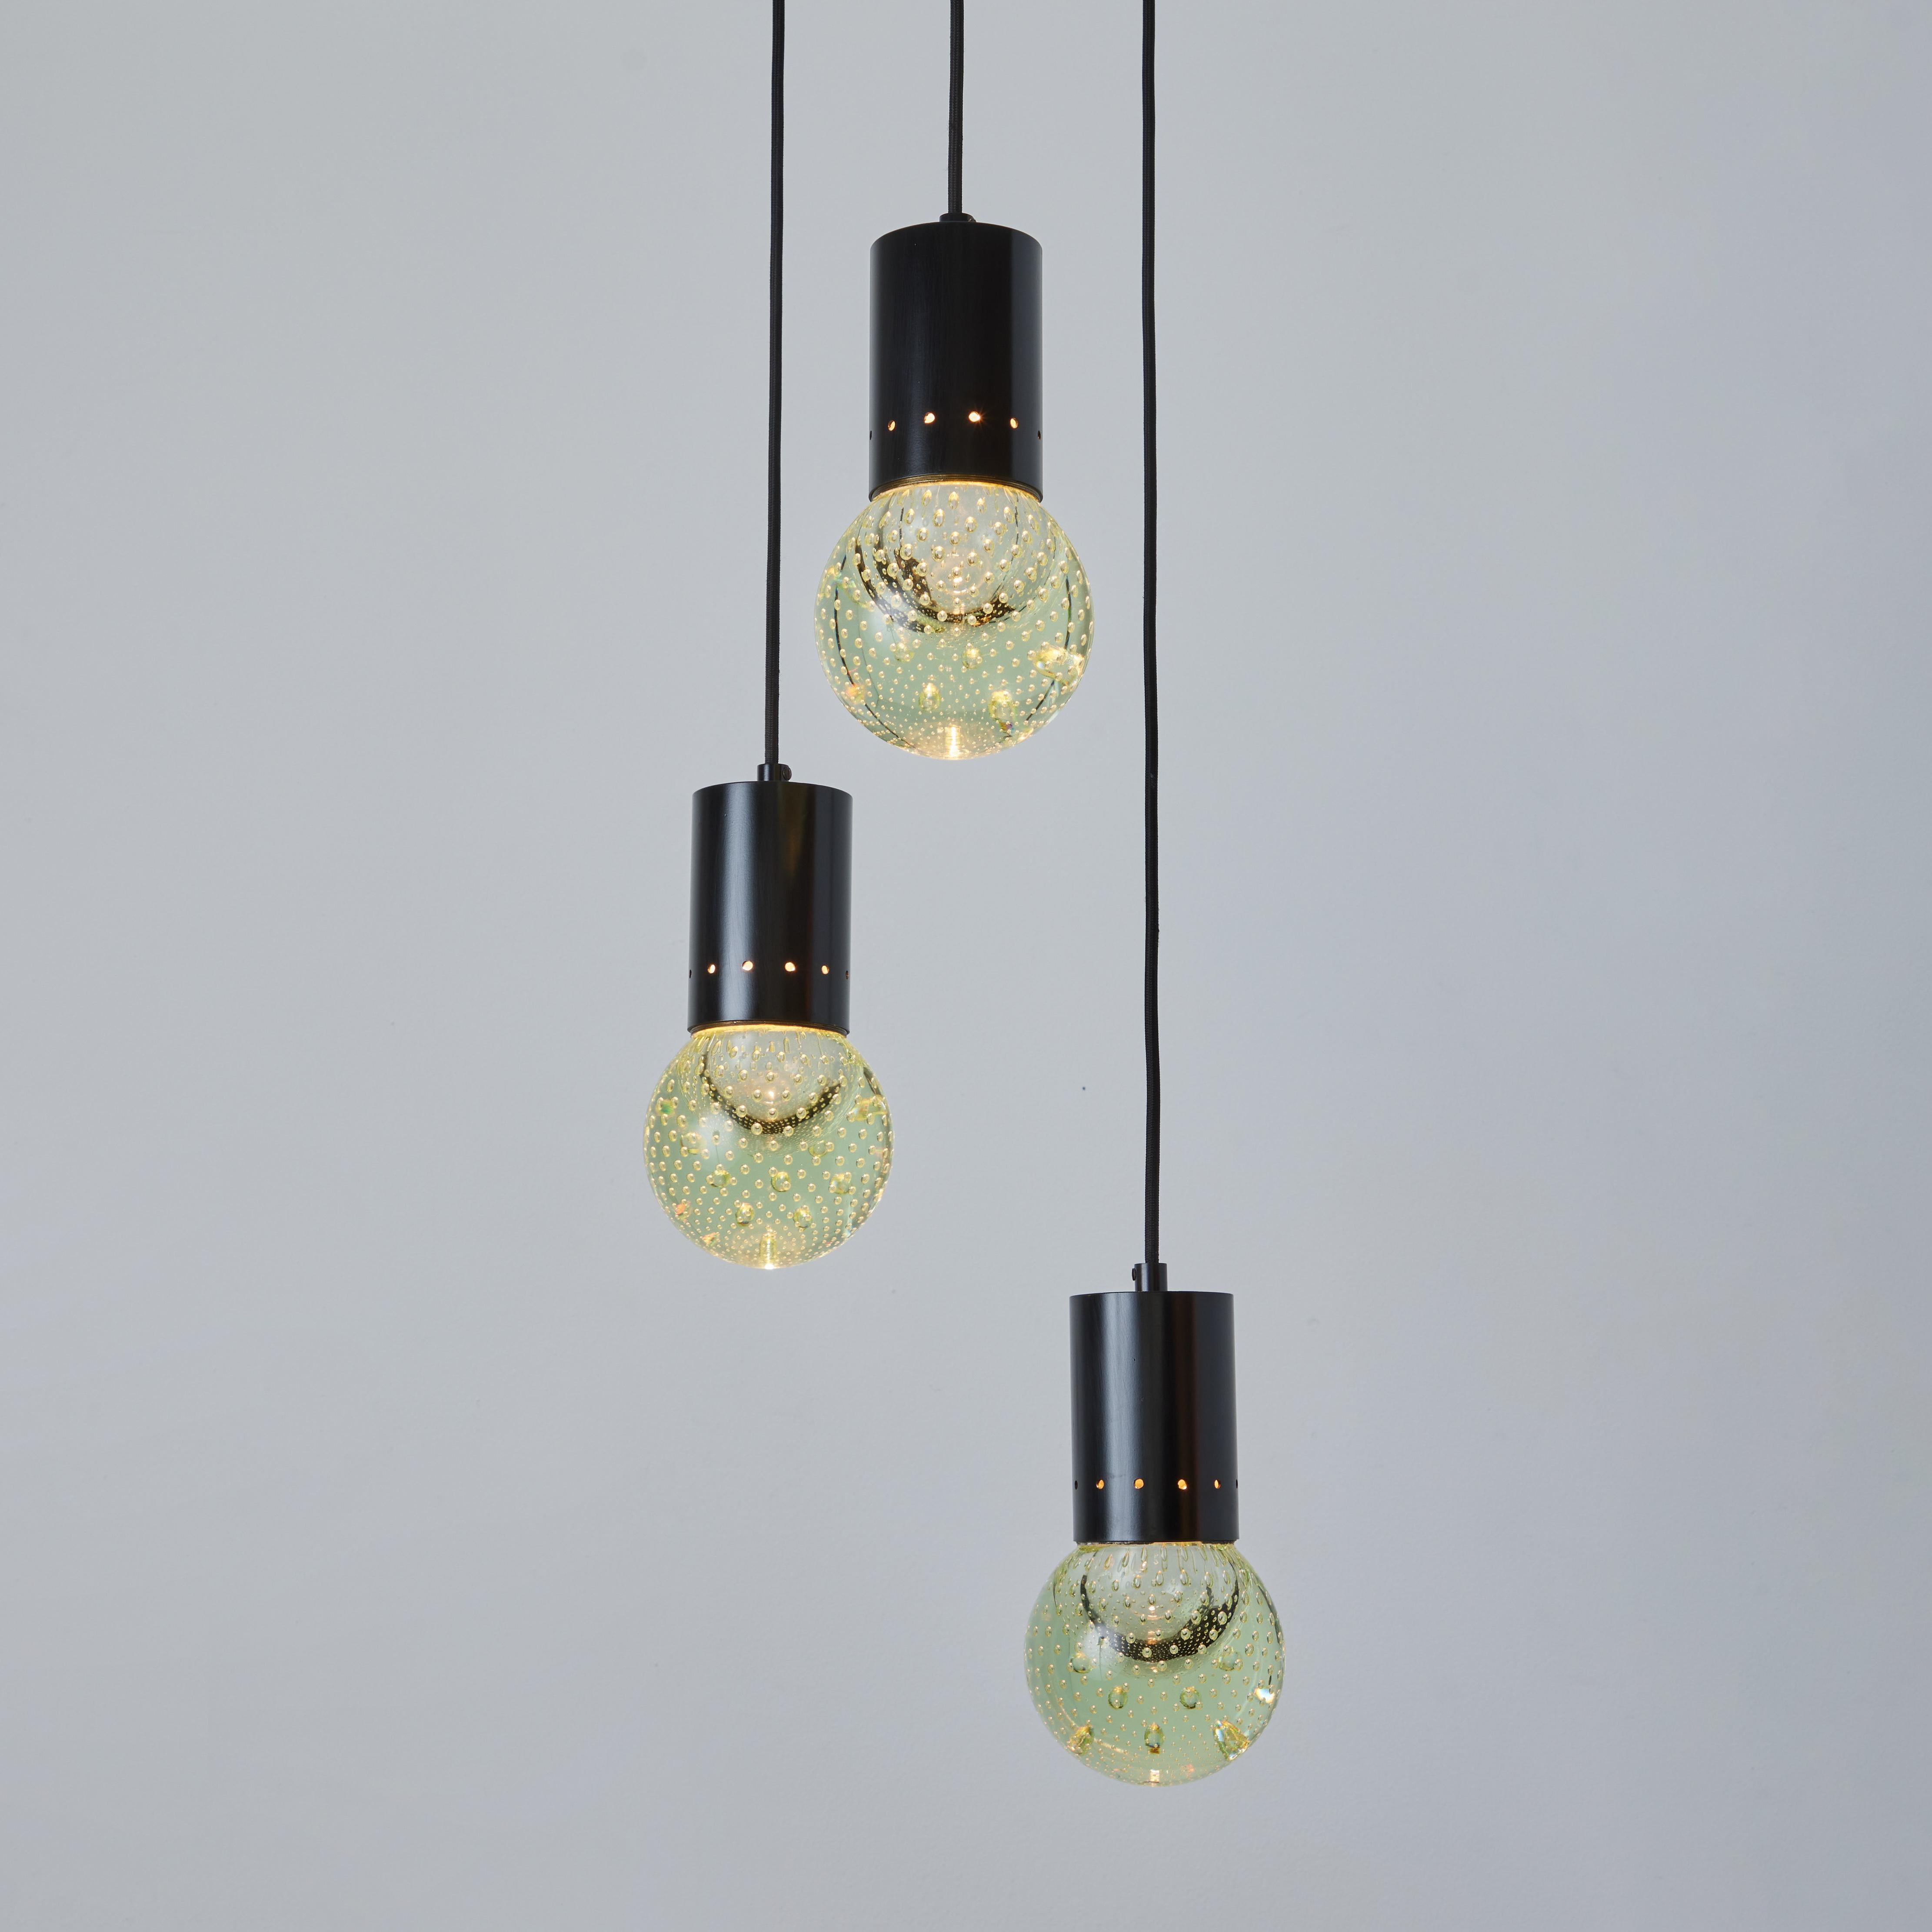 1960s Gino Sarfatti Seguso Bubble Glass 3-Pendant Chandelier for Arteluce. Executed in 3 hand blown bubbled Seguso glass pendants with brass and black painted metal accents. The simplicity of Sarfatti's design and the sculptural shaping of the